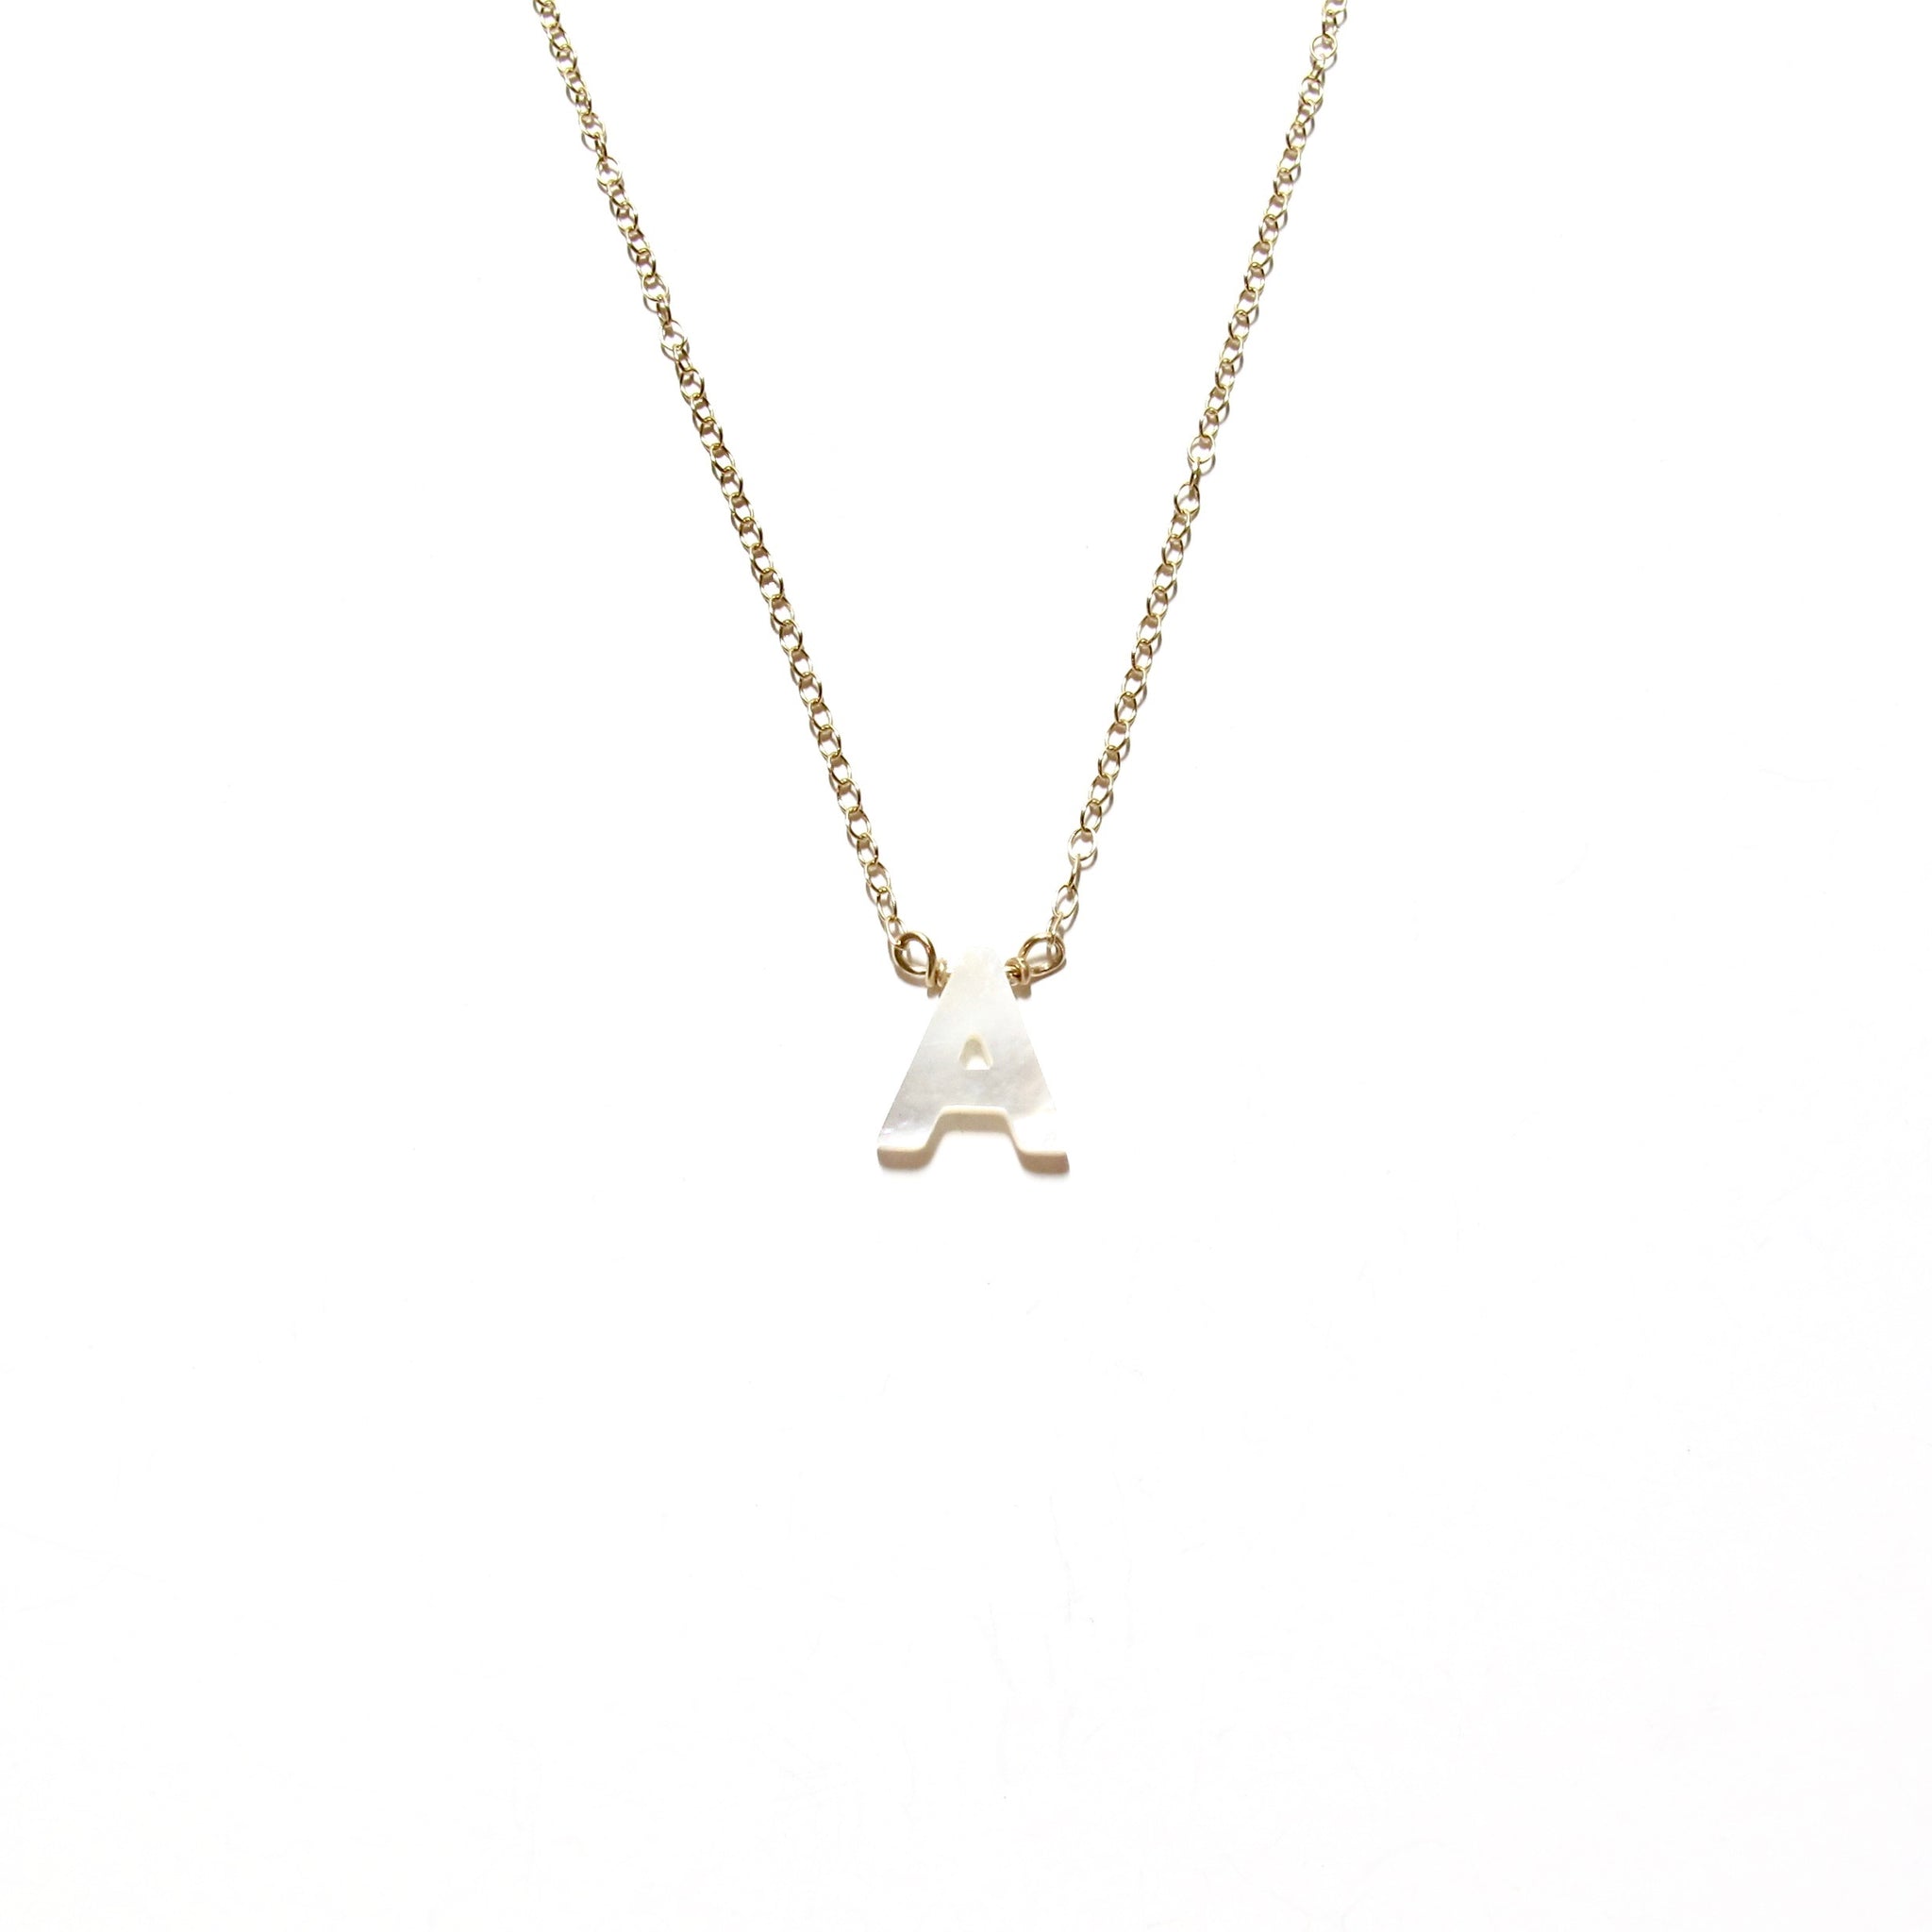 Buy Initial Pearl Choker Online In India - Etsy India